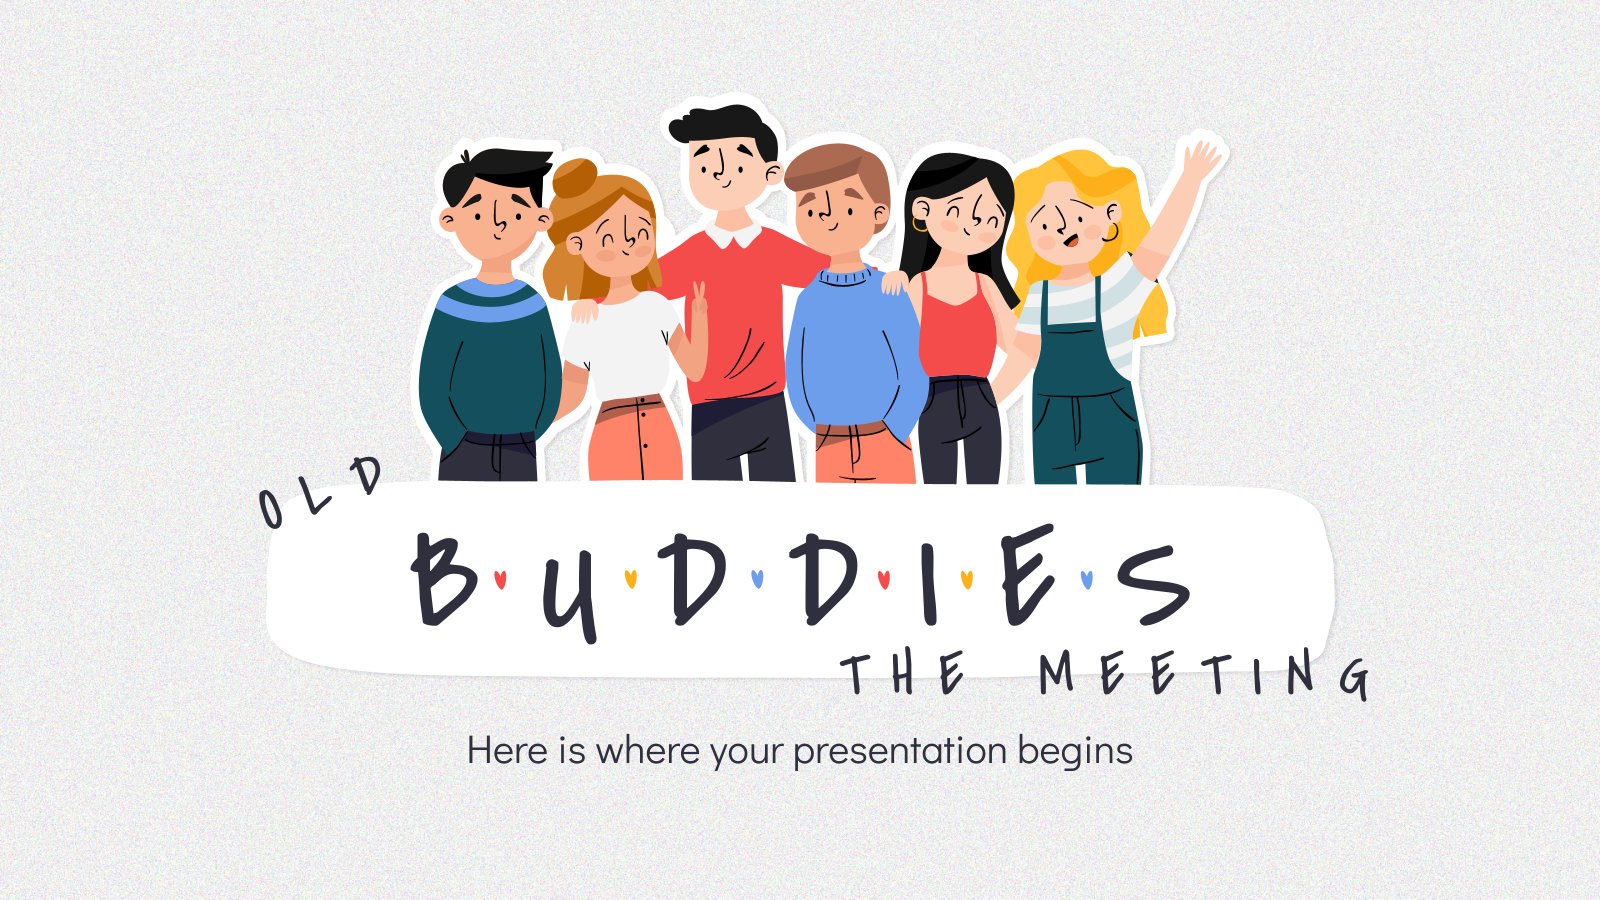 Old Buddies The Meeting presentation template 